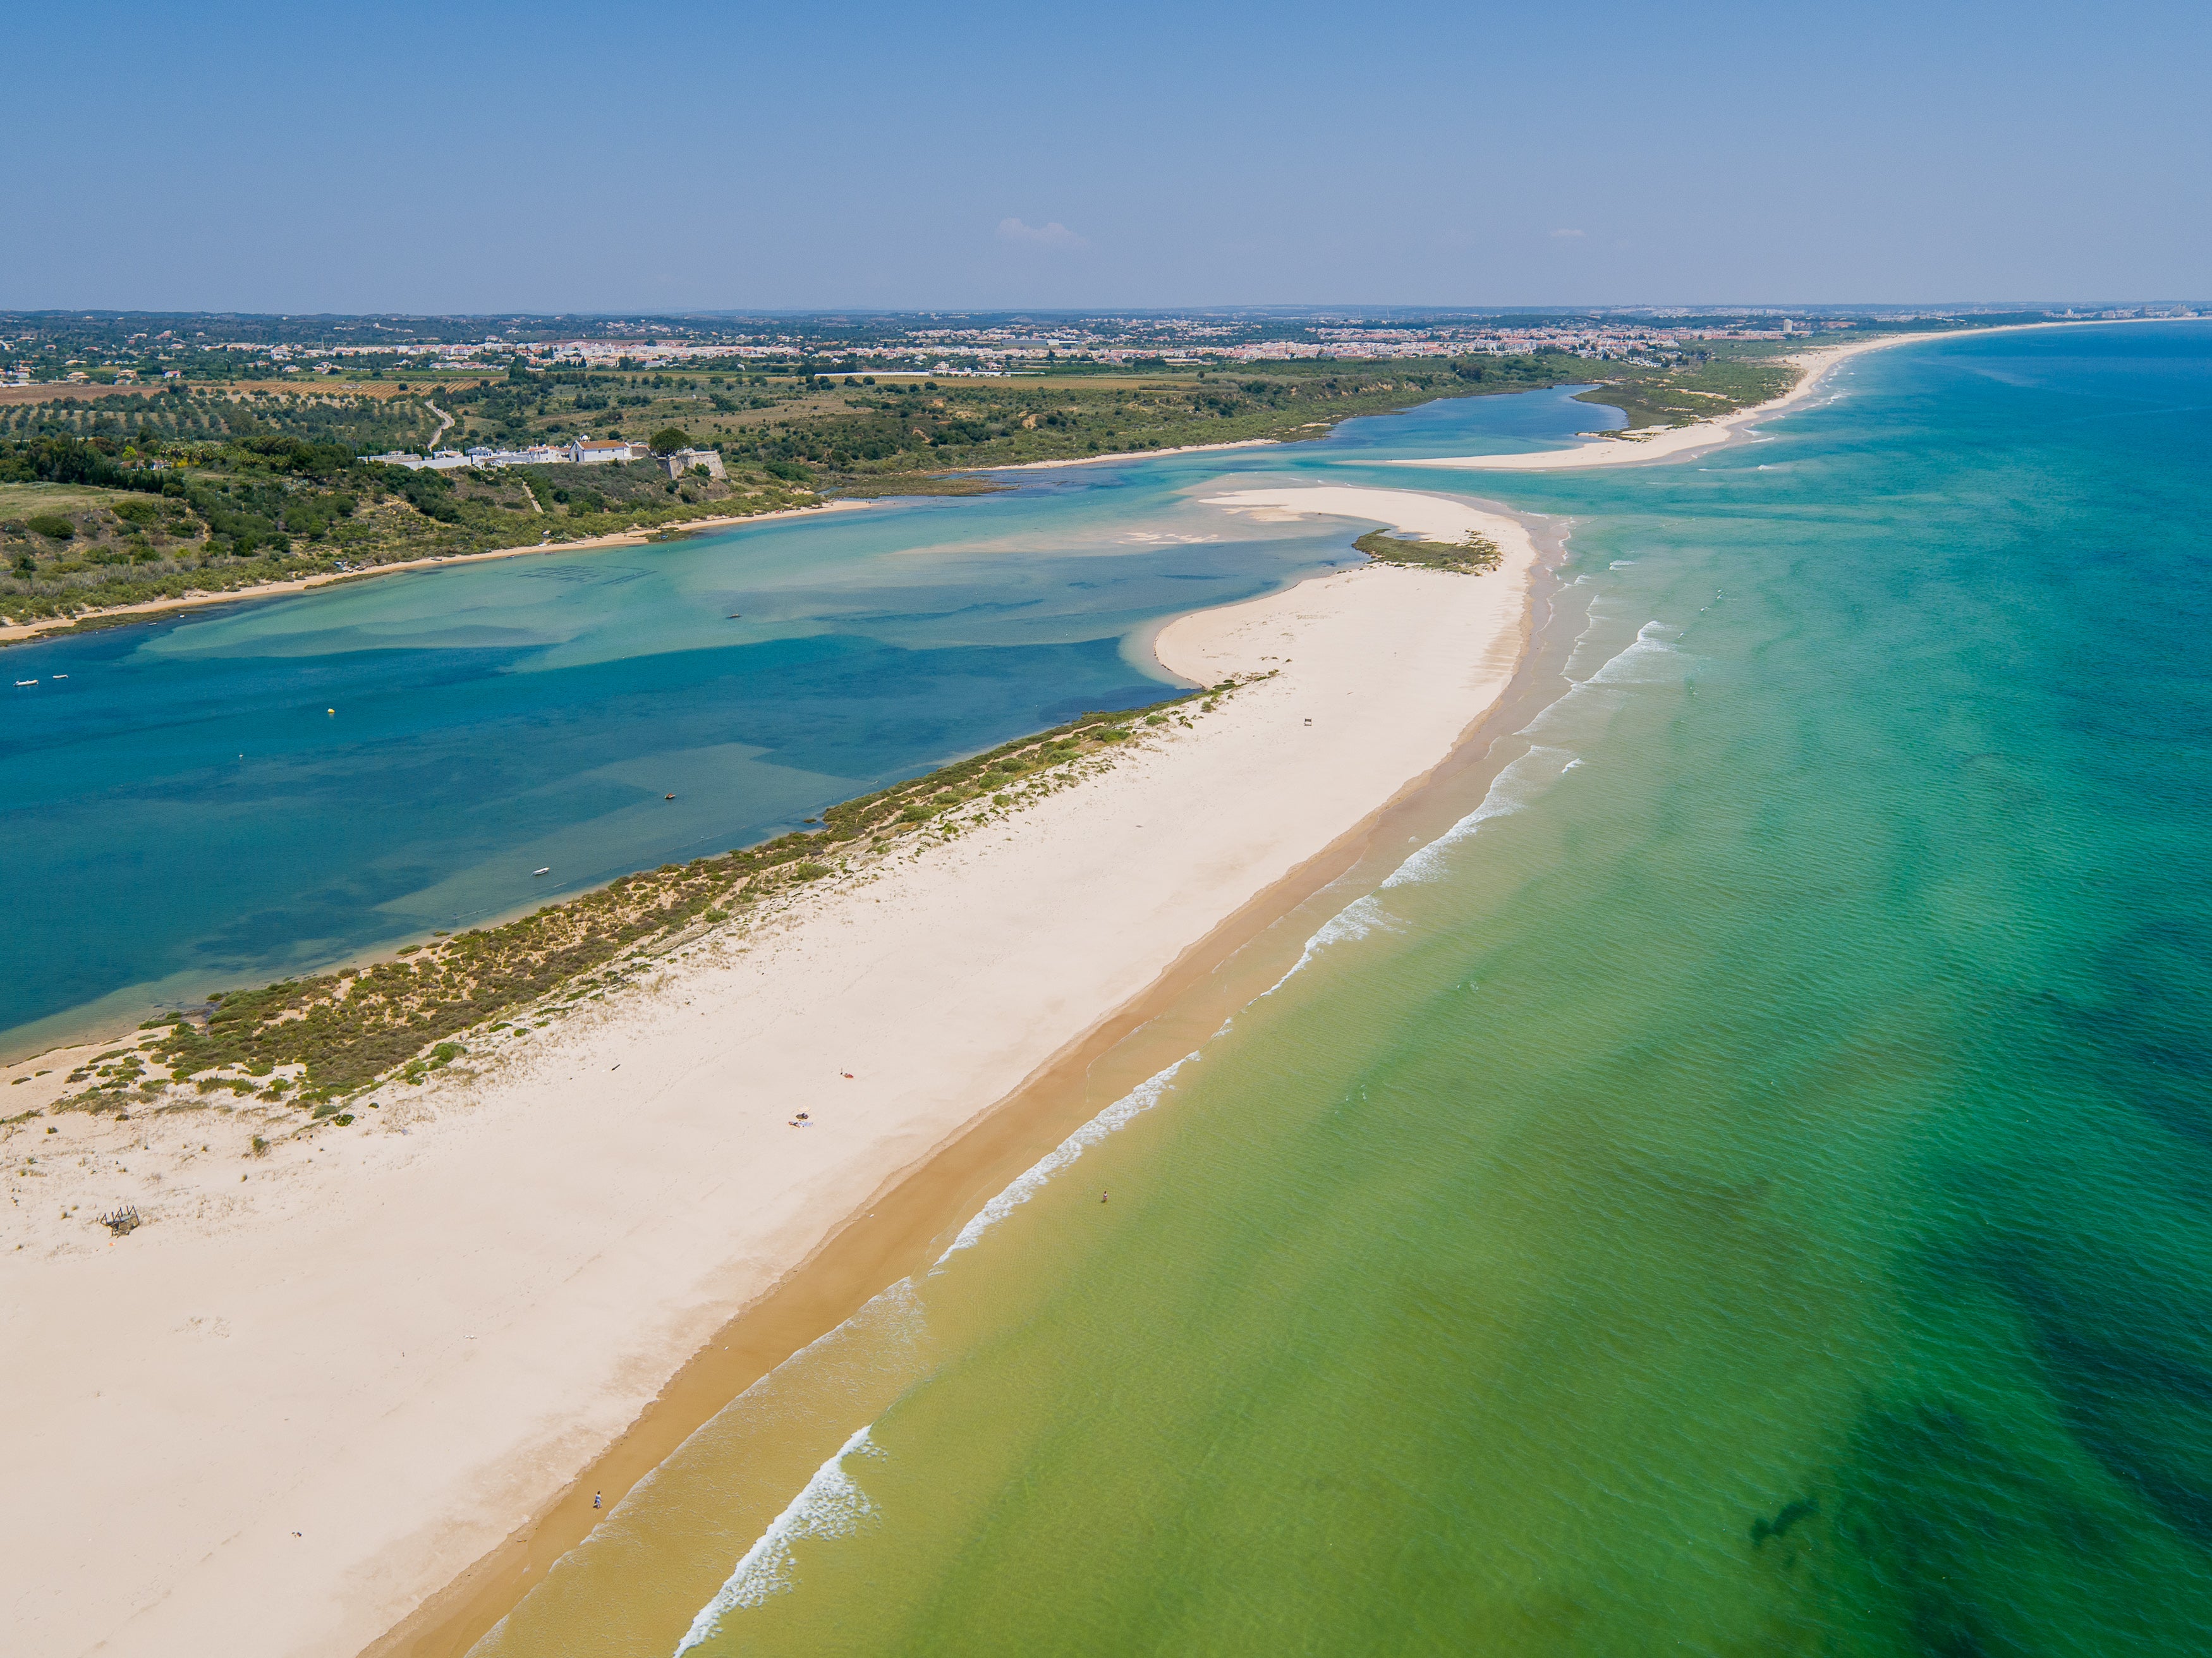 Enjoy a stroll, paddle or swim at sunset on this stunning bow-shaped beach